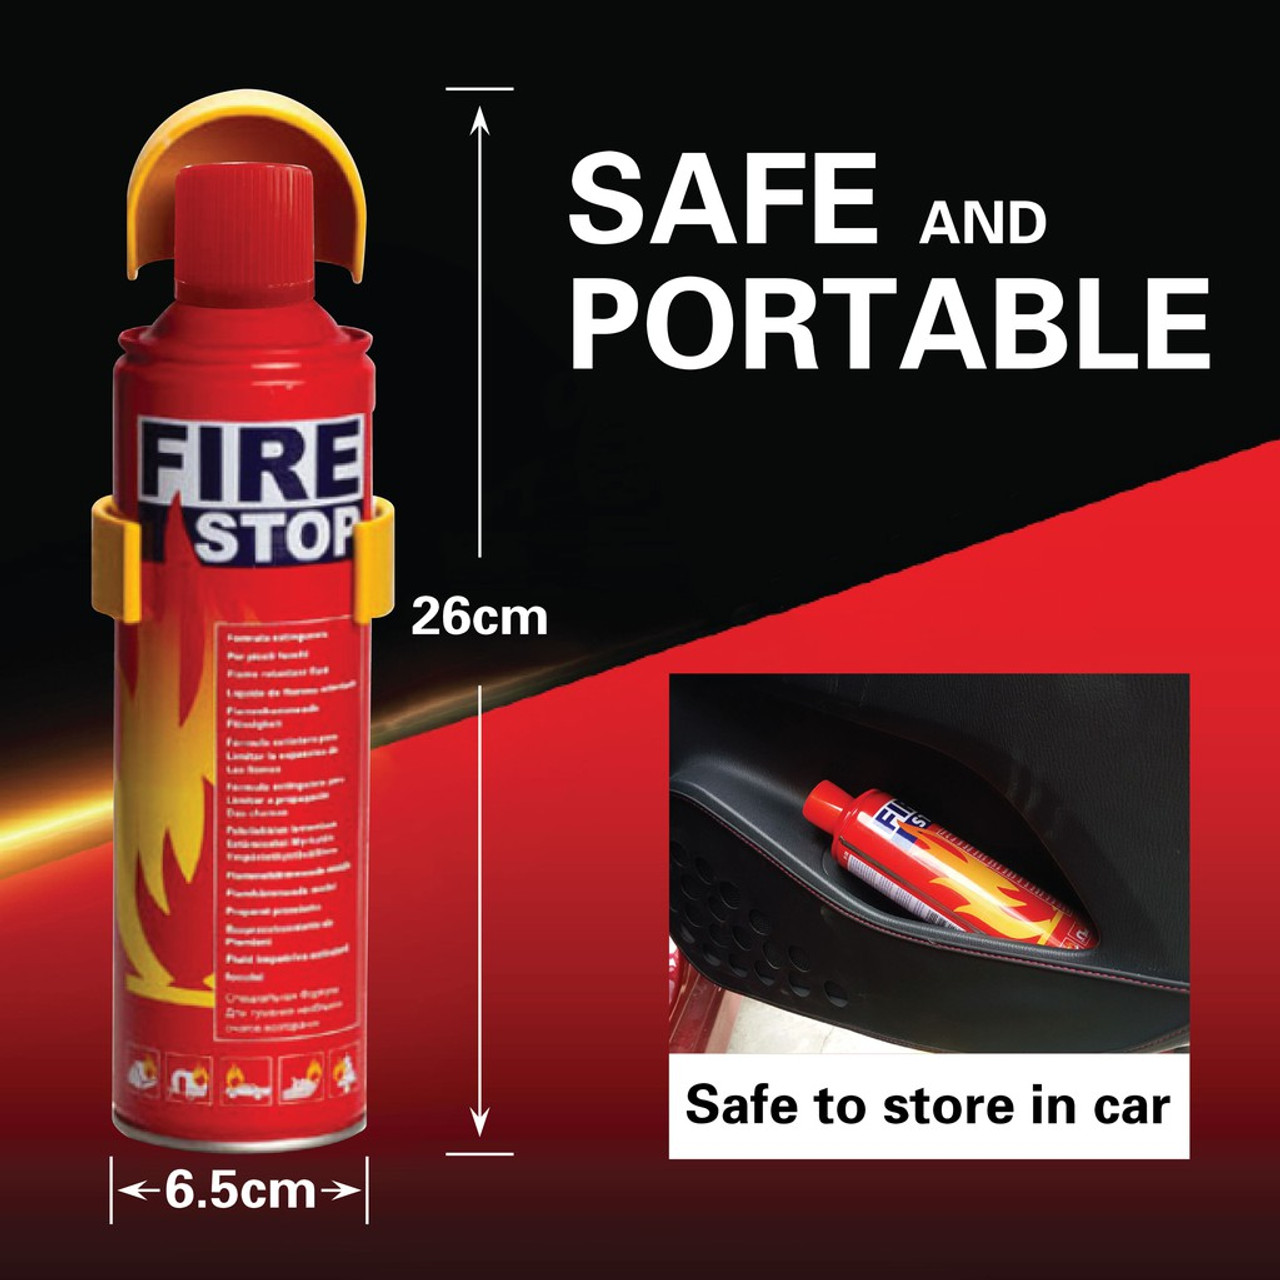 Fire extinguisher spray, 500 ml, for more safety in everyday life, ideal  fire extinguisher household for the kitchen, perfect as a mini fire